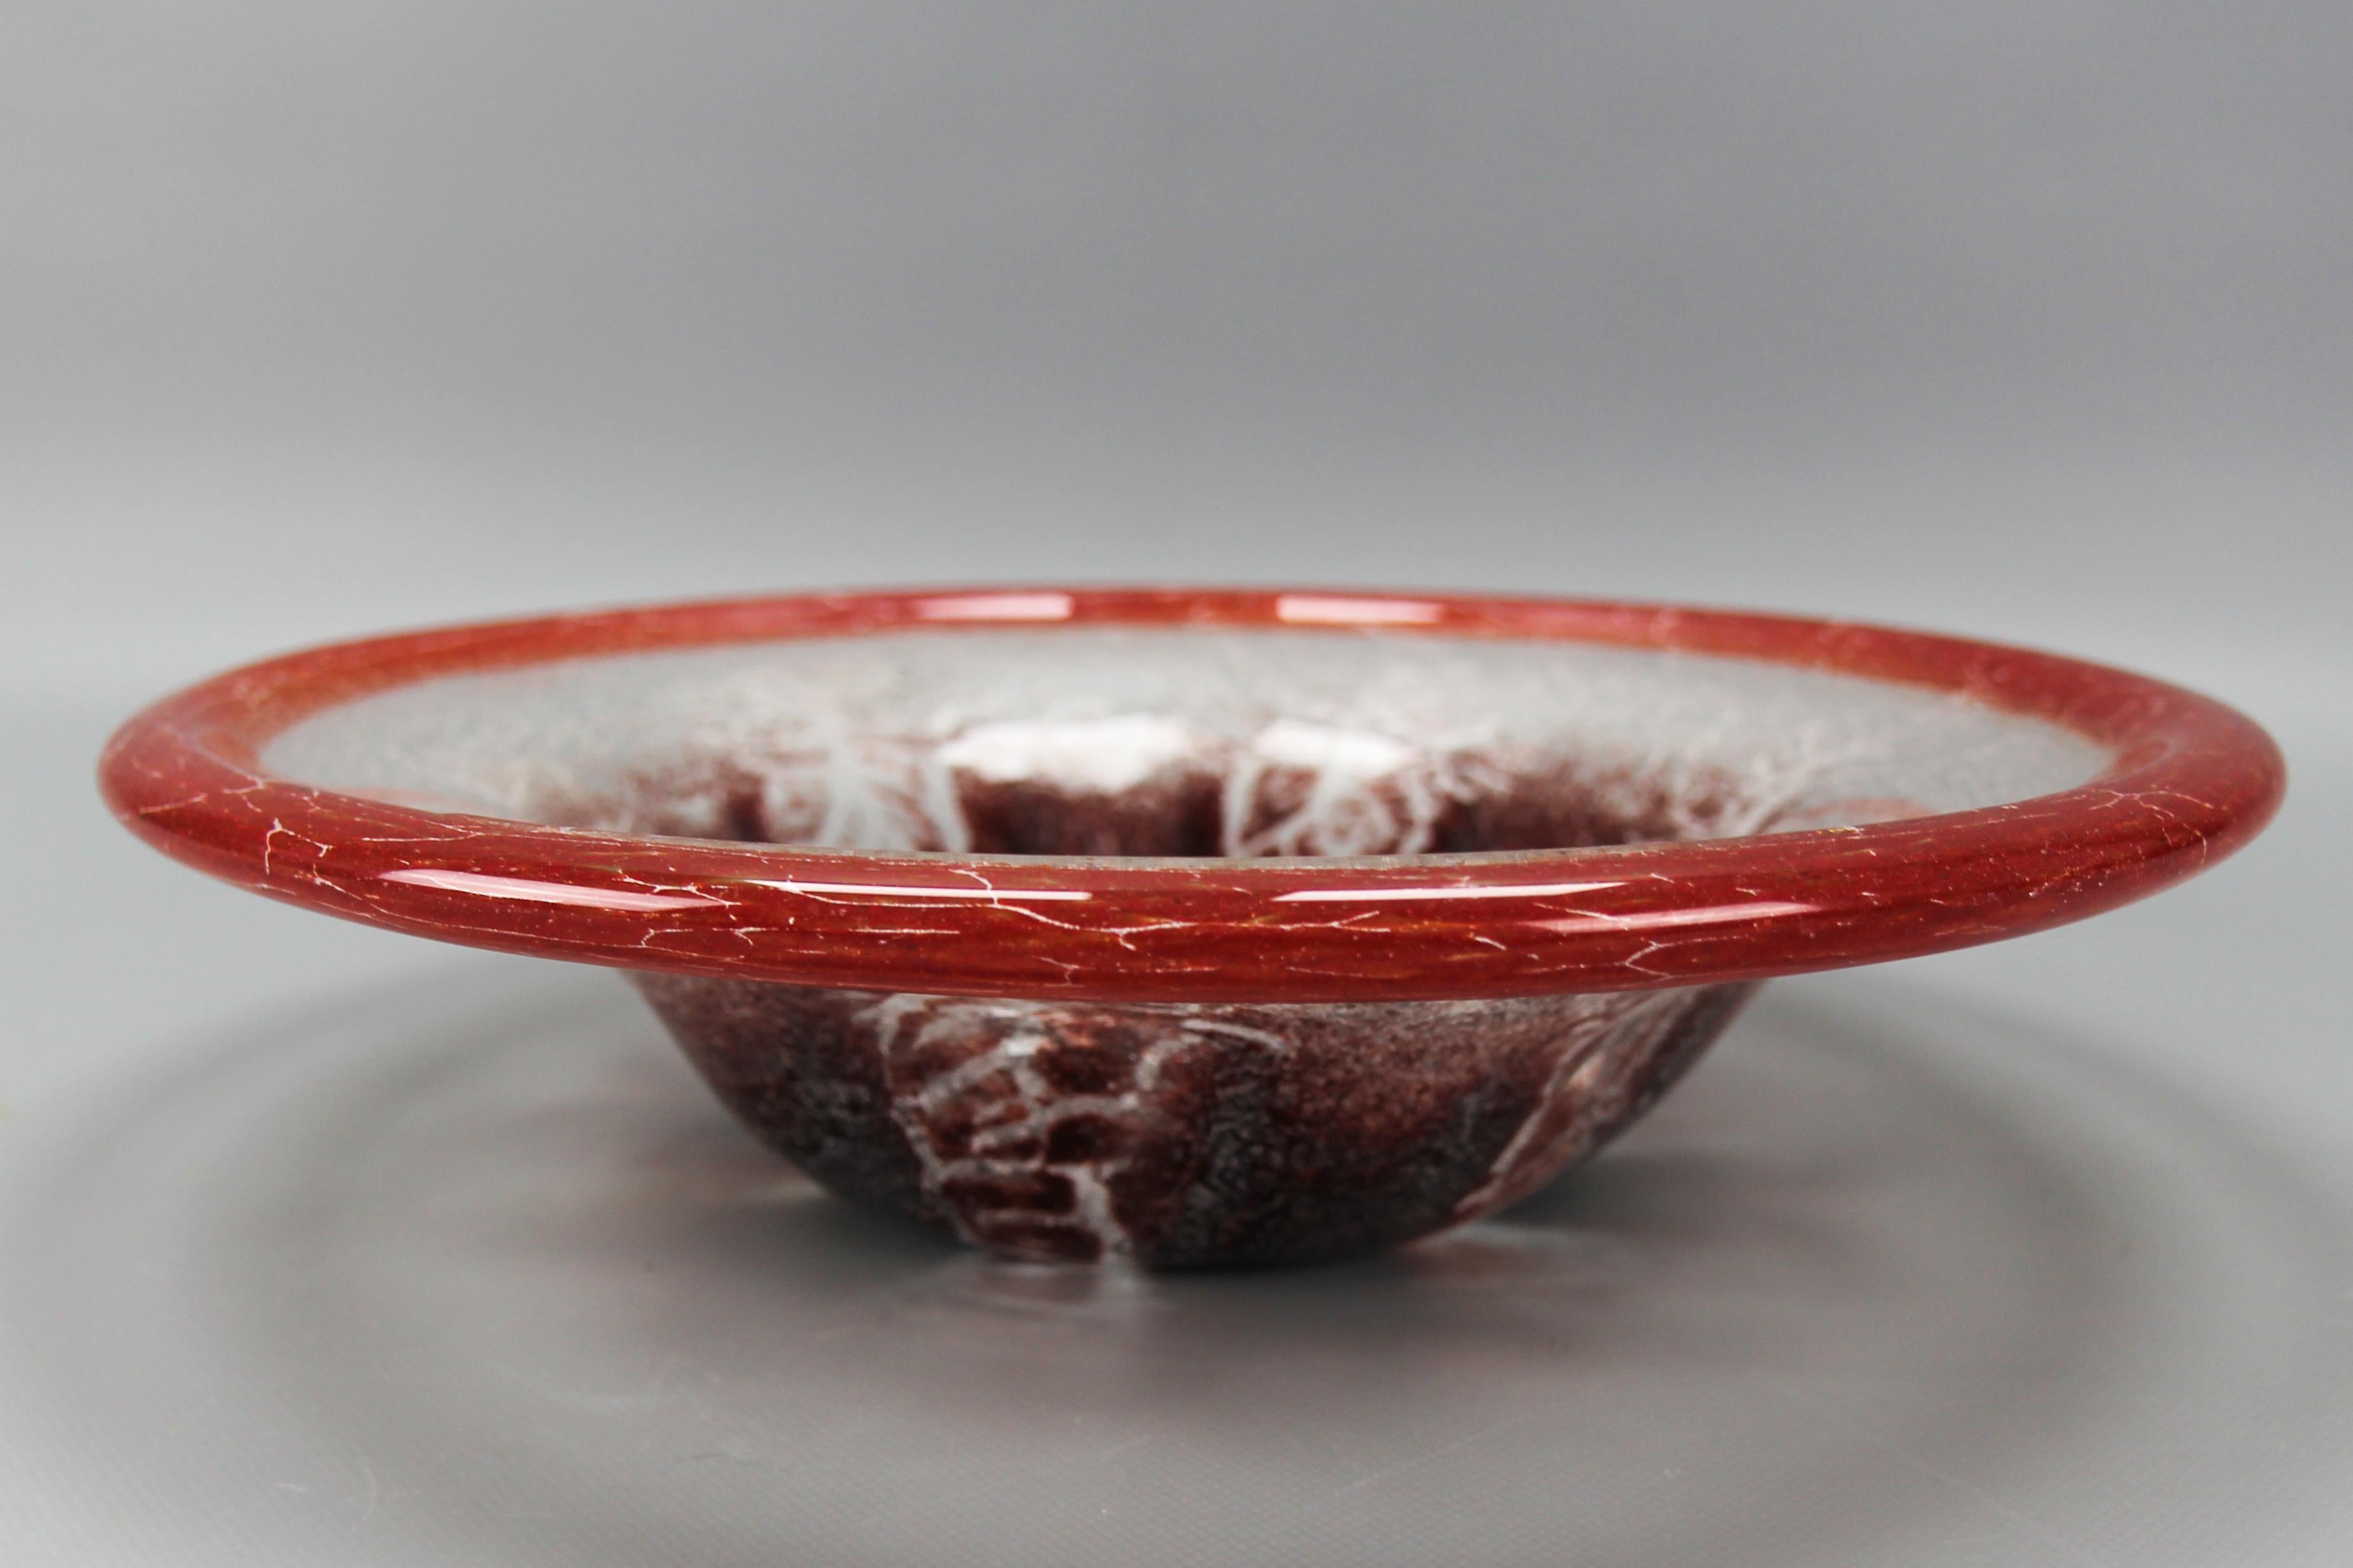 German Ikora Art Glass Bowl in Red, White and Burgundy by WMF, ca. 1930s For Sale 7